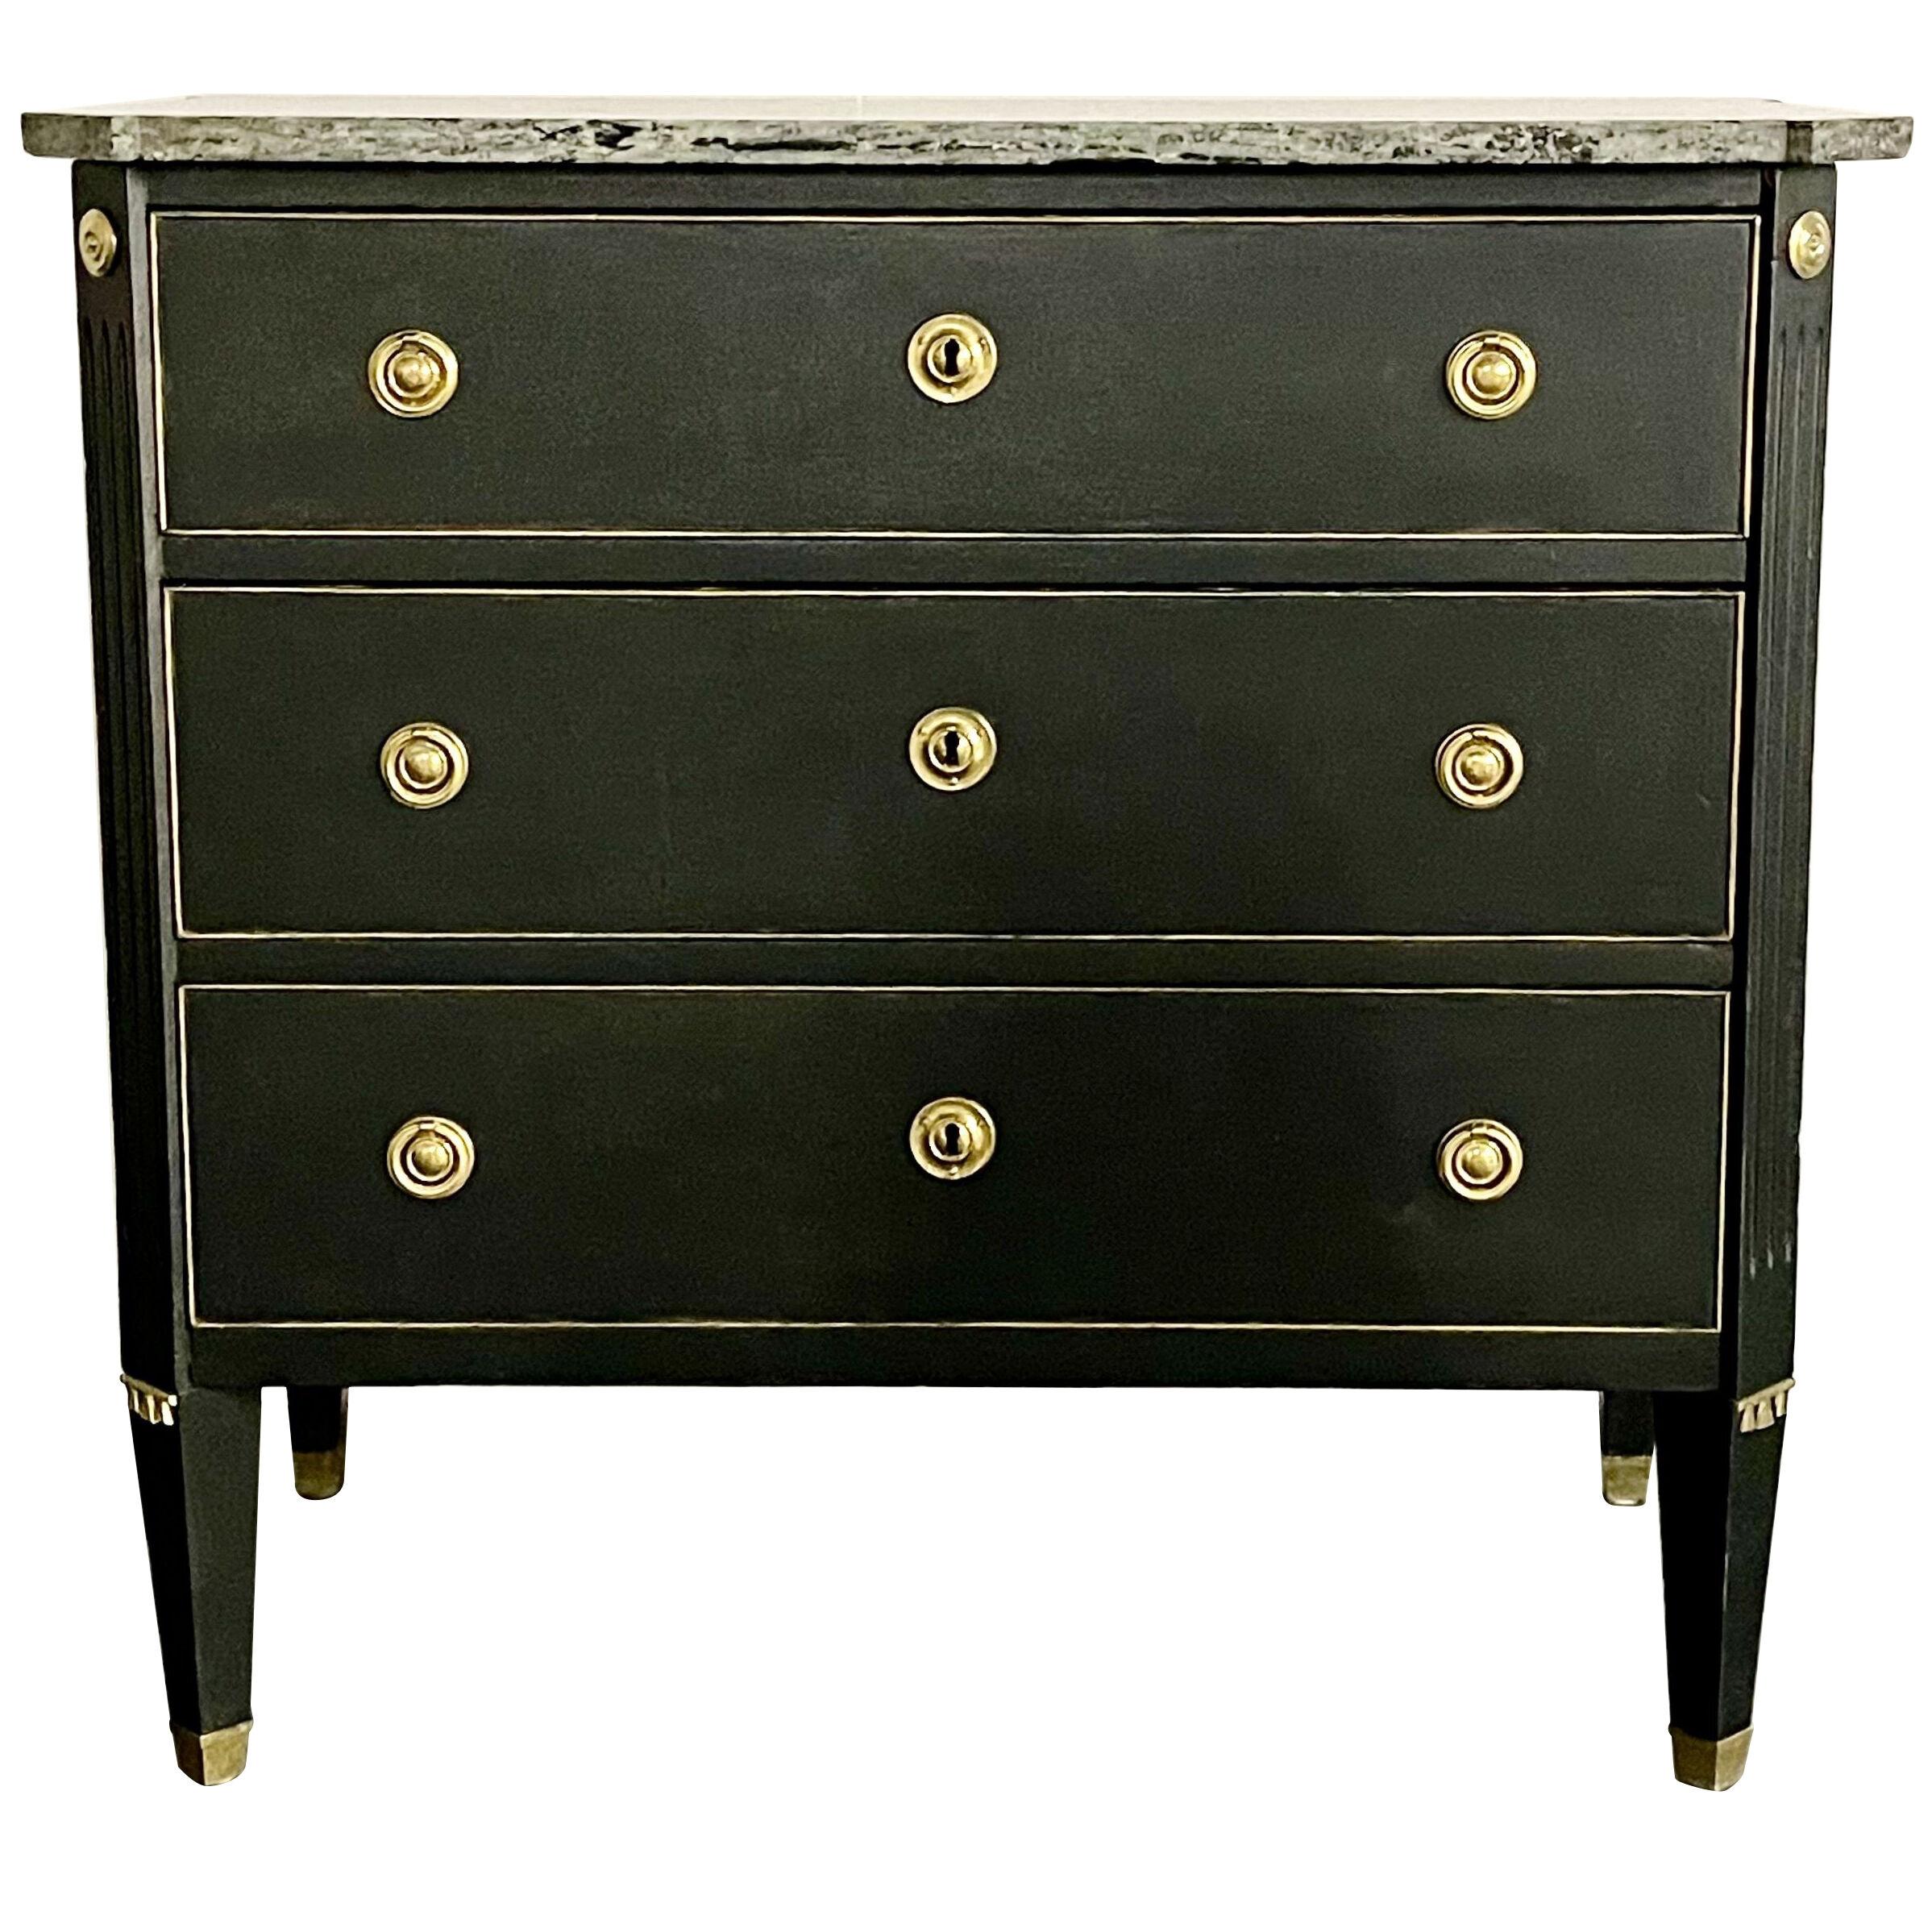 Gustavian Chest, Ebony, Painted Faux Marble Top, Brass Accent, 20th Century